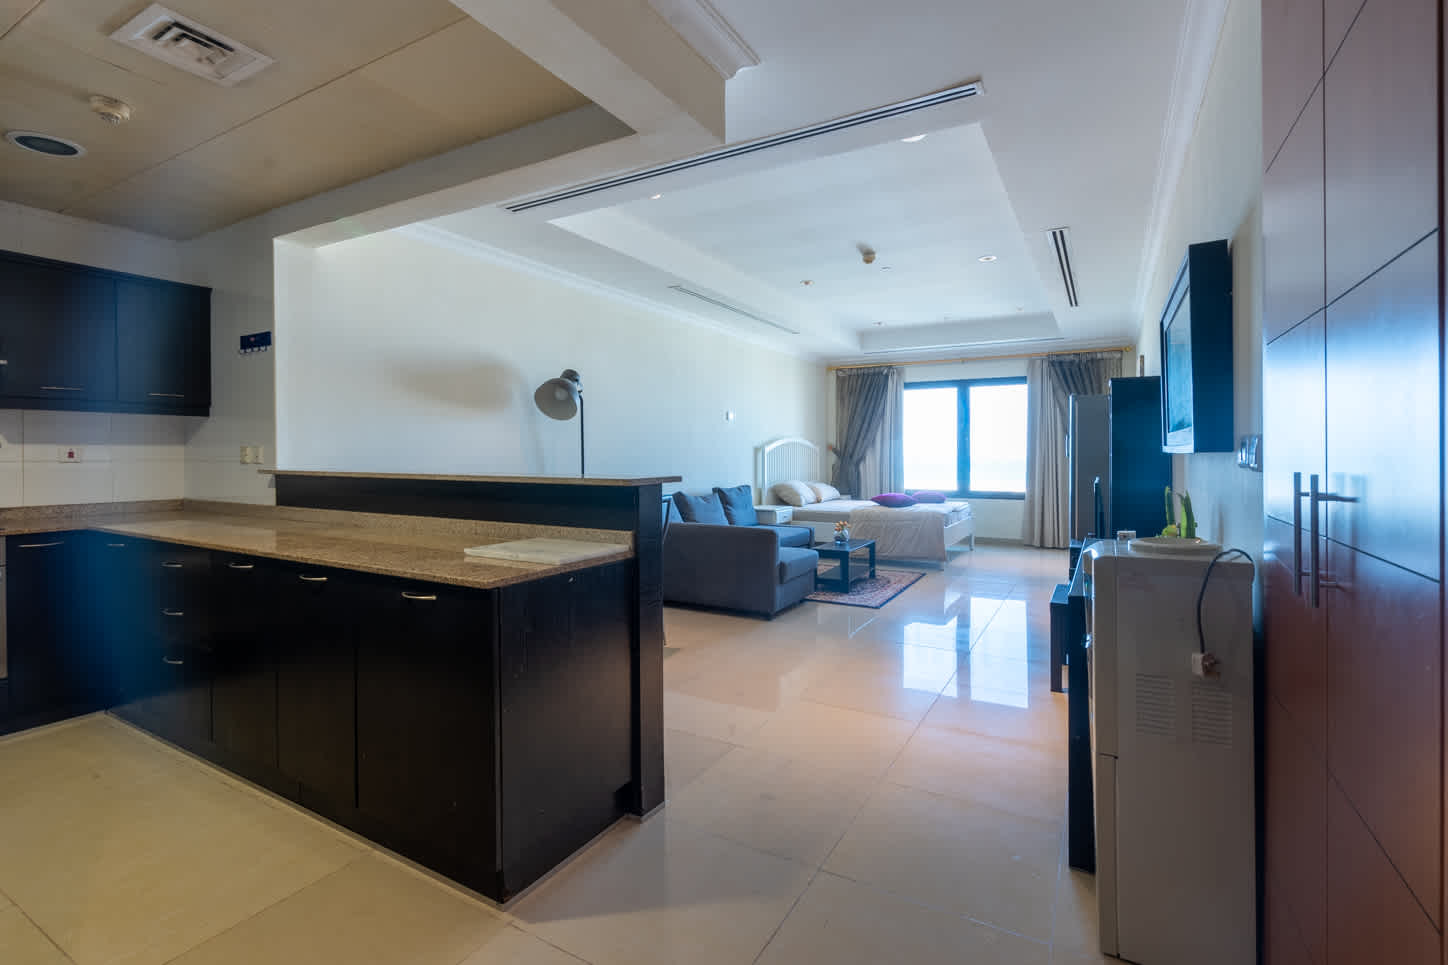 25 Spaces Real Estate - Porto Arabia - Properties for Rent - 16 March 2023 refWAPT258066 (1)